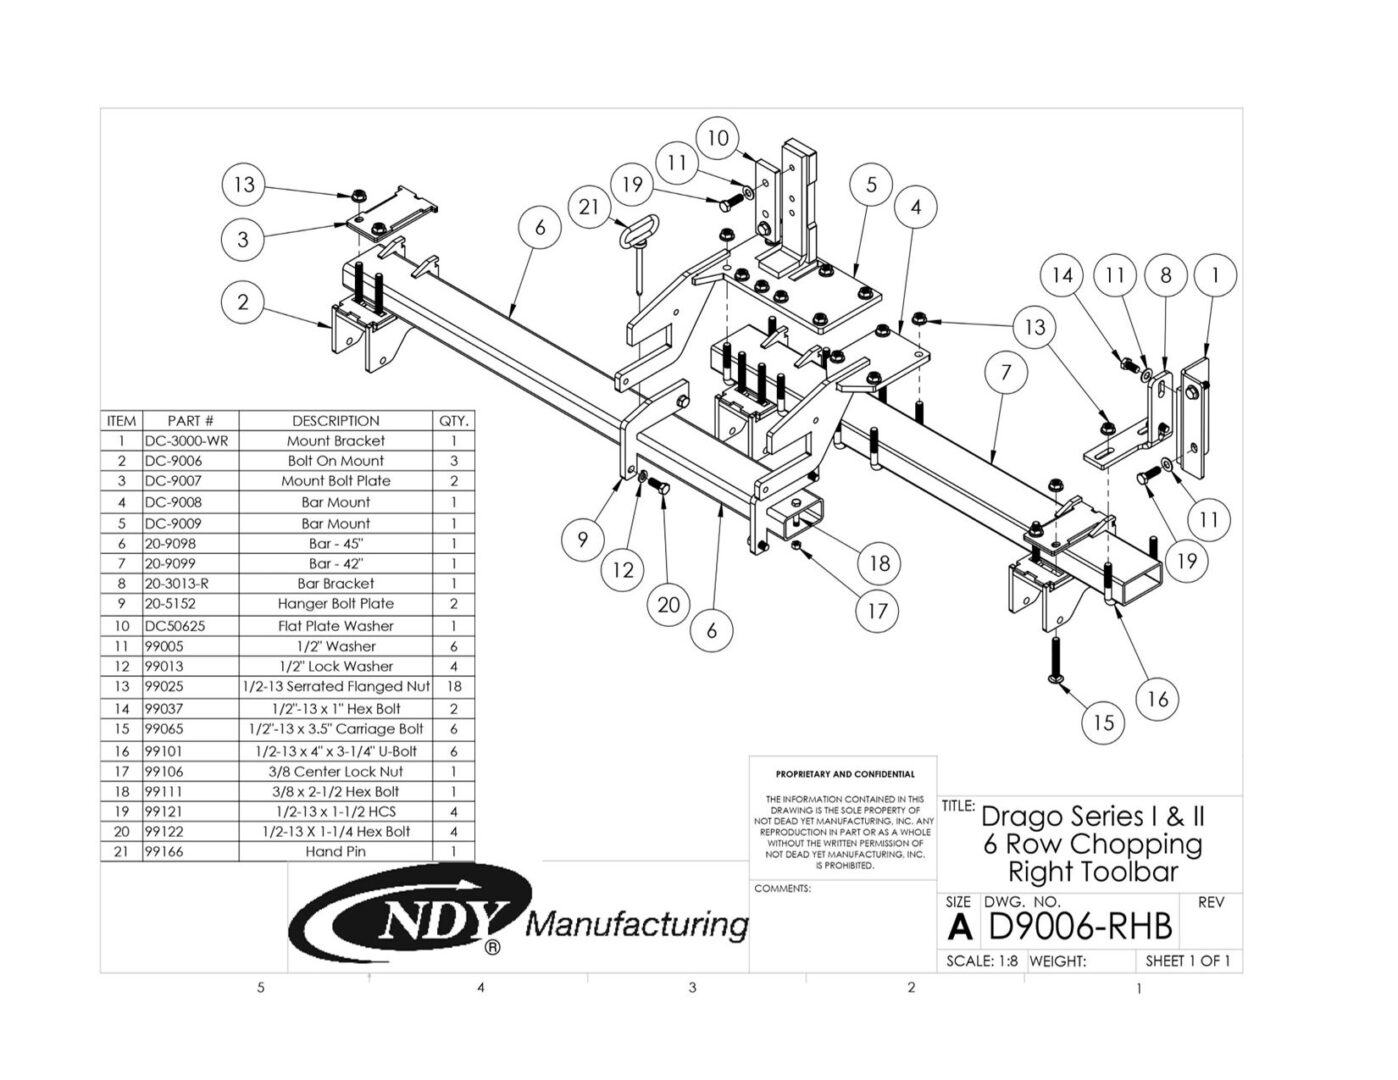 A diagram showing the parts of a Stalk Stomper Right Toolbar for Drago Series I & II 6 Row Chopping Corn Head.